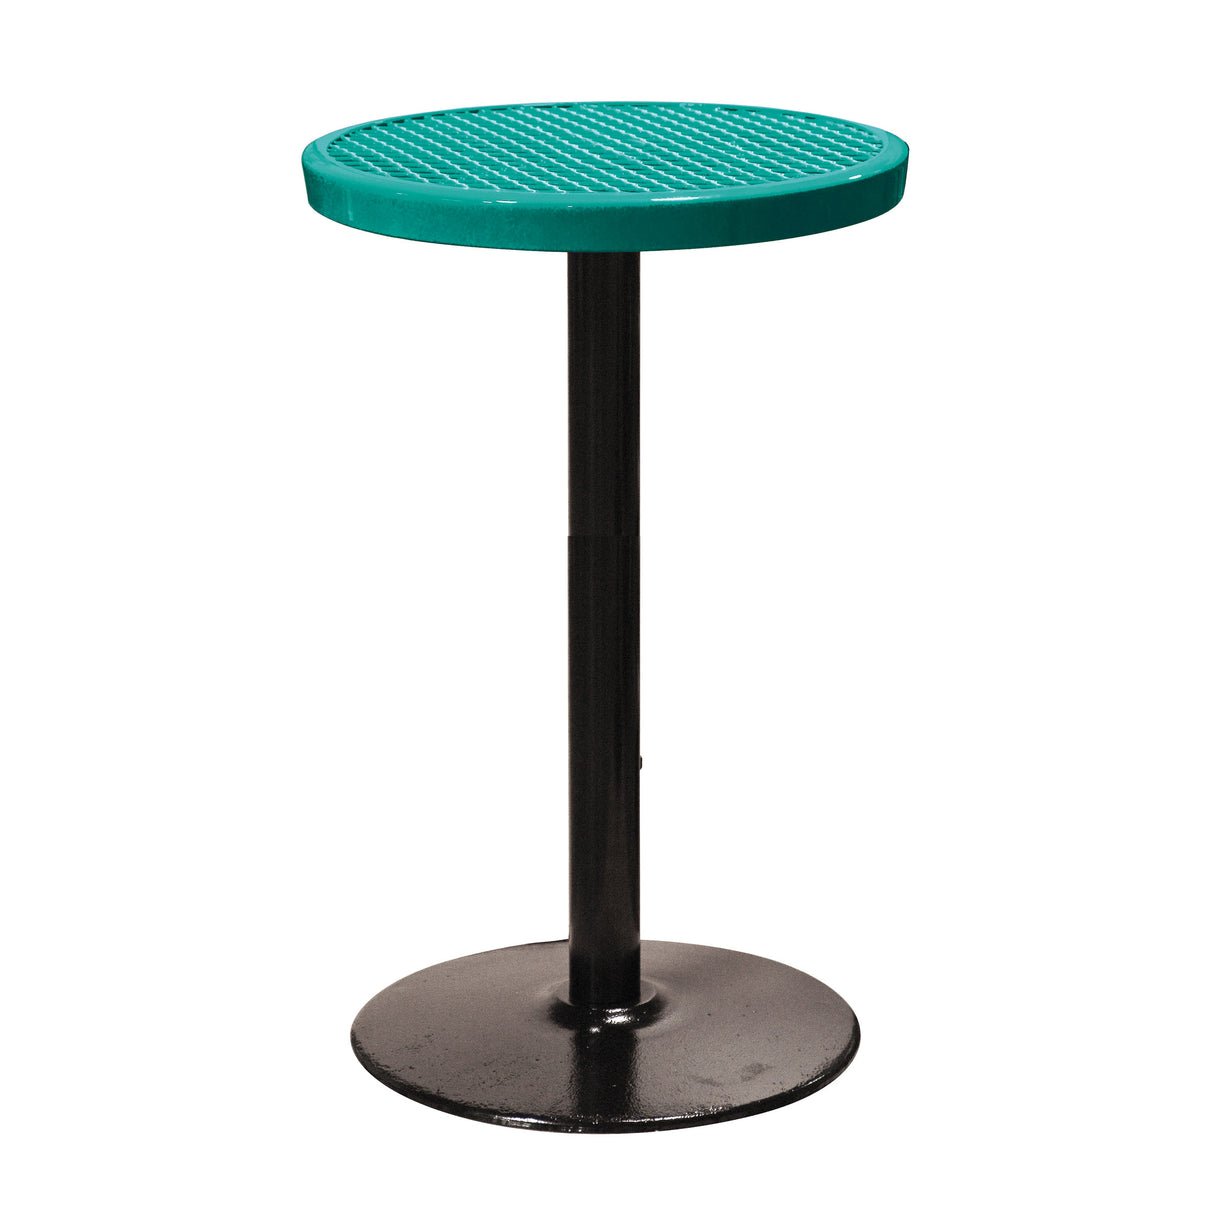 24˝ Expanded Pedestal Table